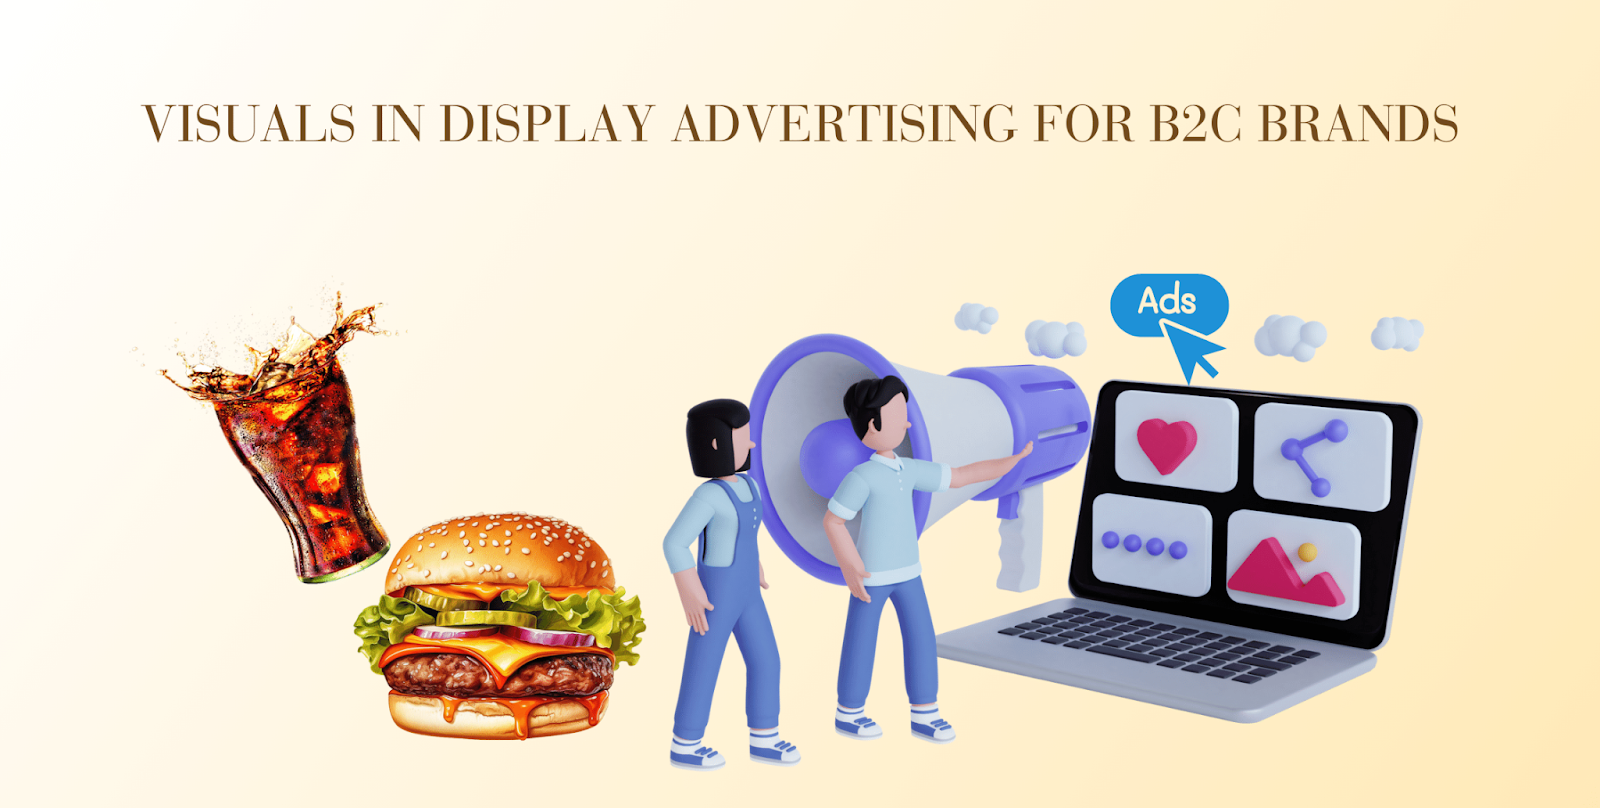 Visuals in Display Advertising for B2C Brands 